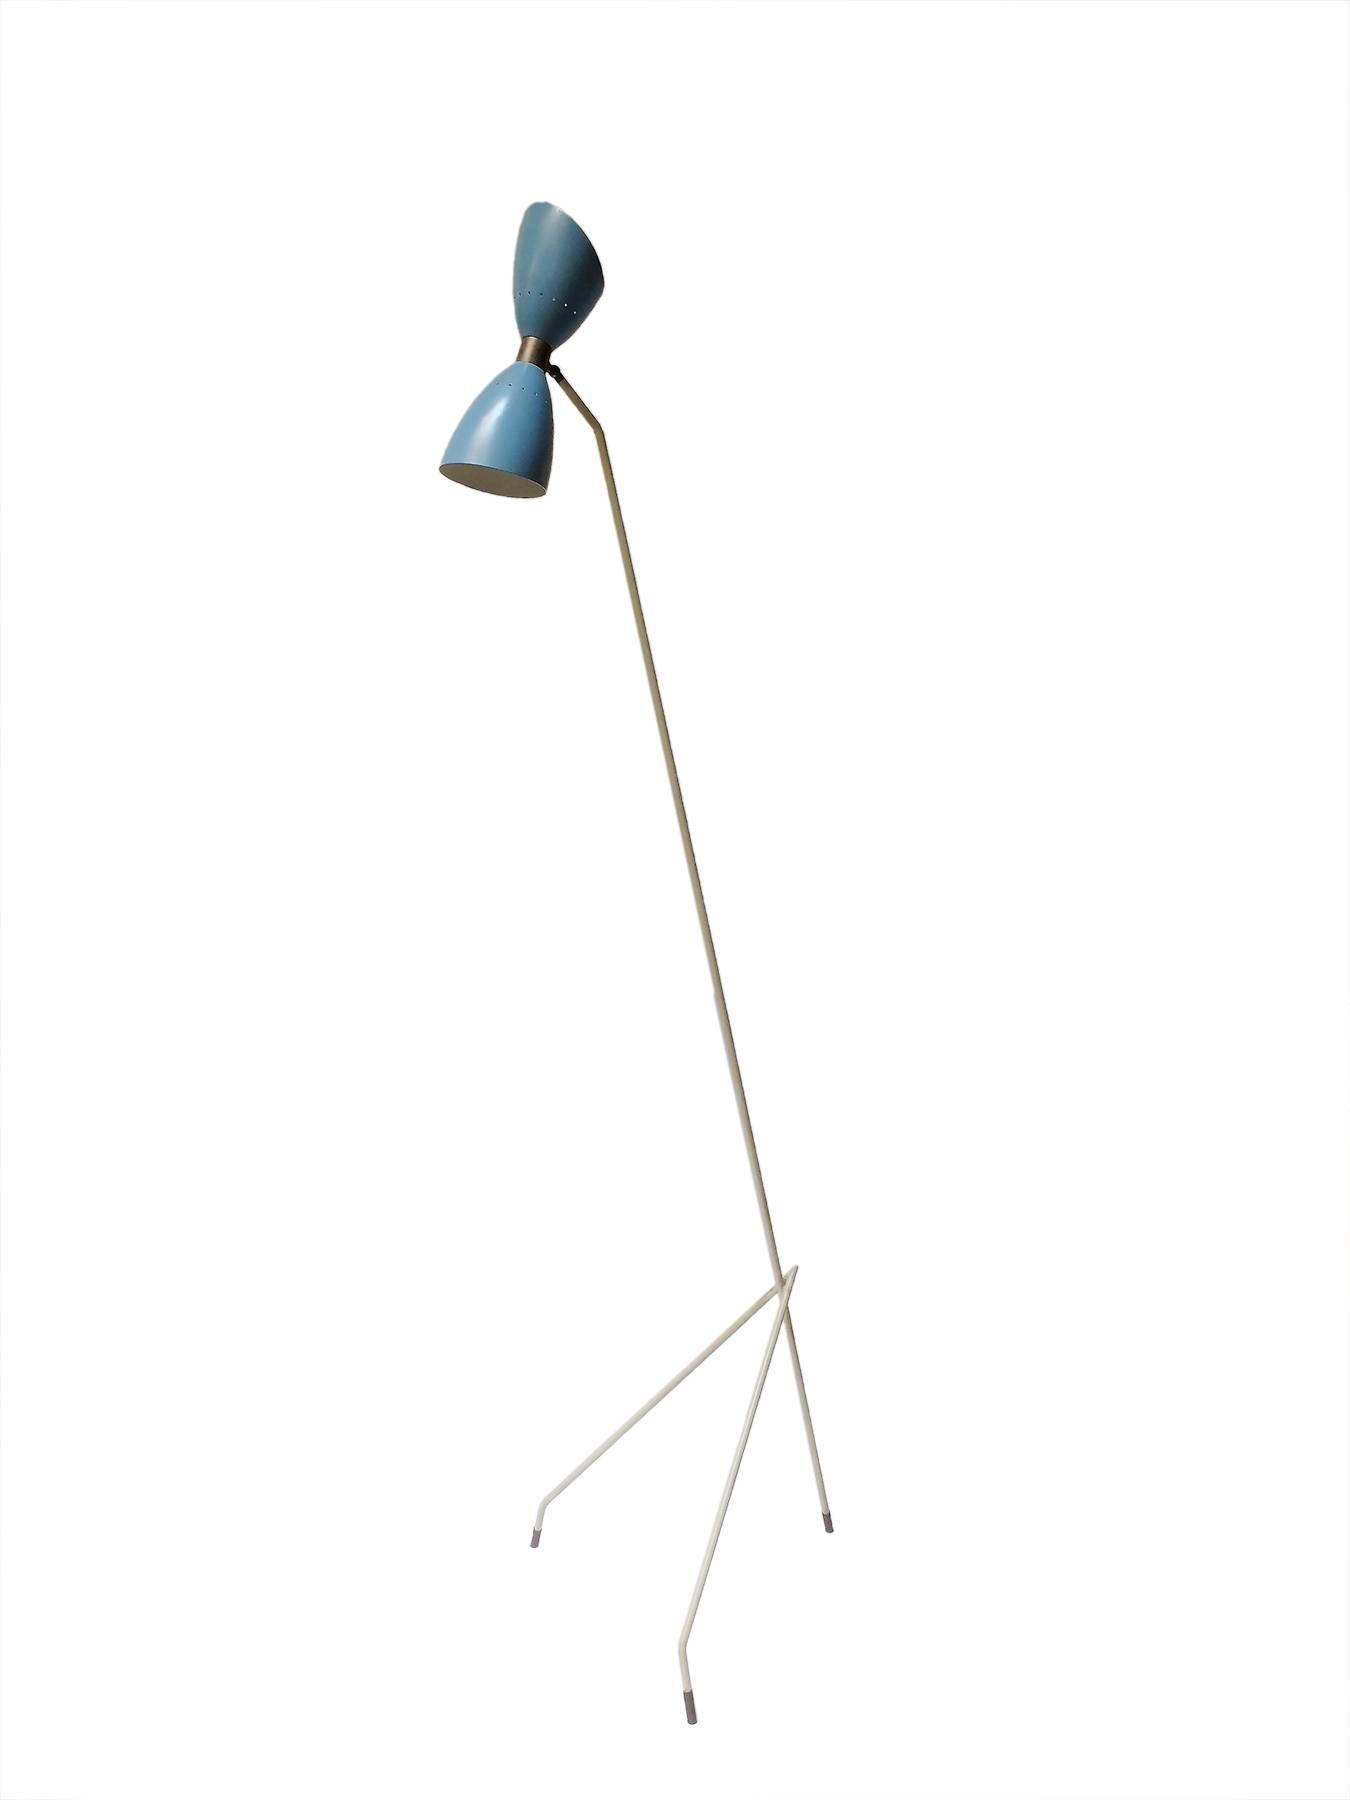 Italian floor lamp, made out of enameled aluminum and gilded brass. Adjustable lampshade, white stand, and tripod.